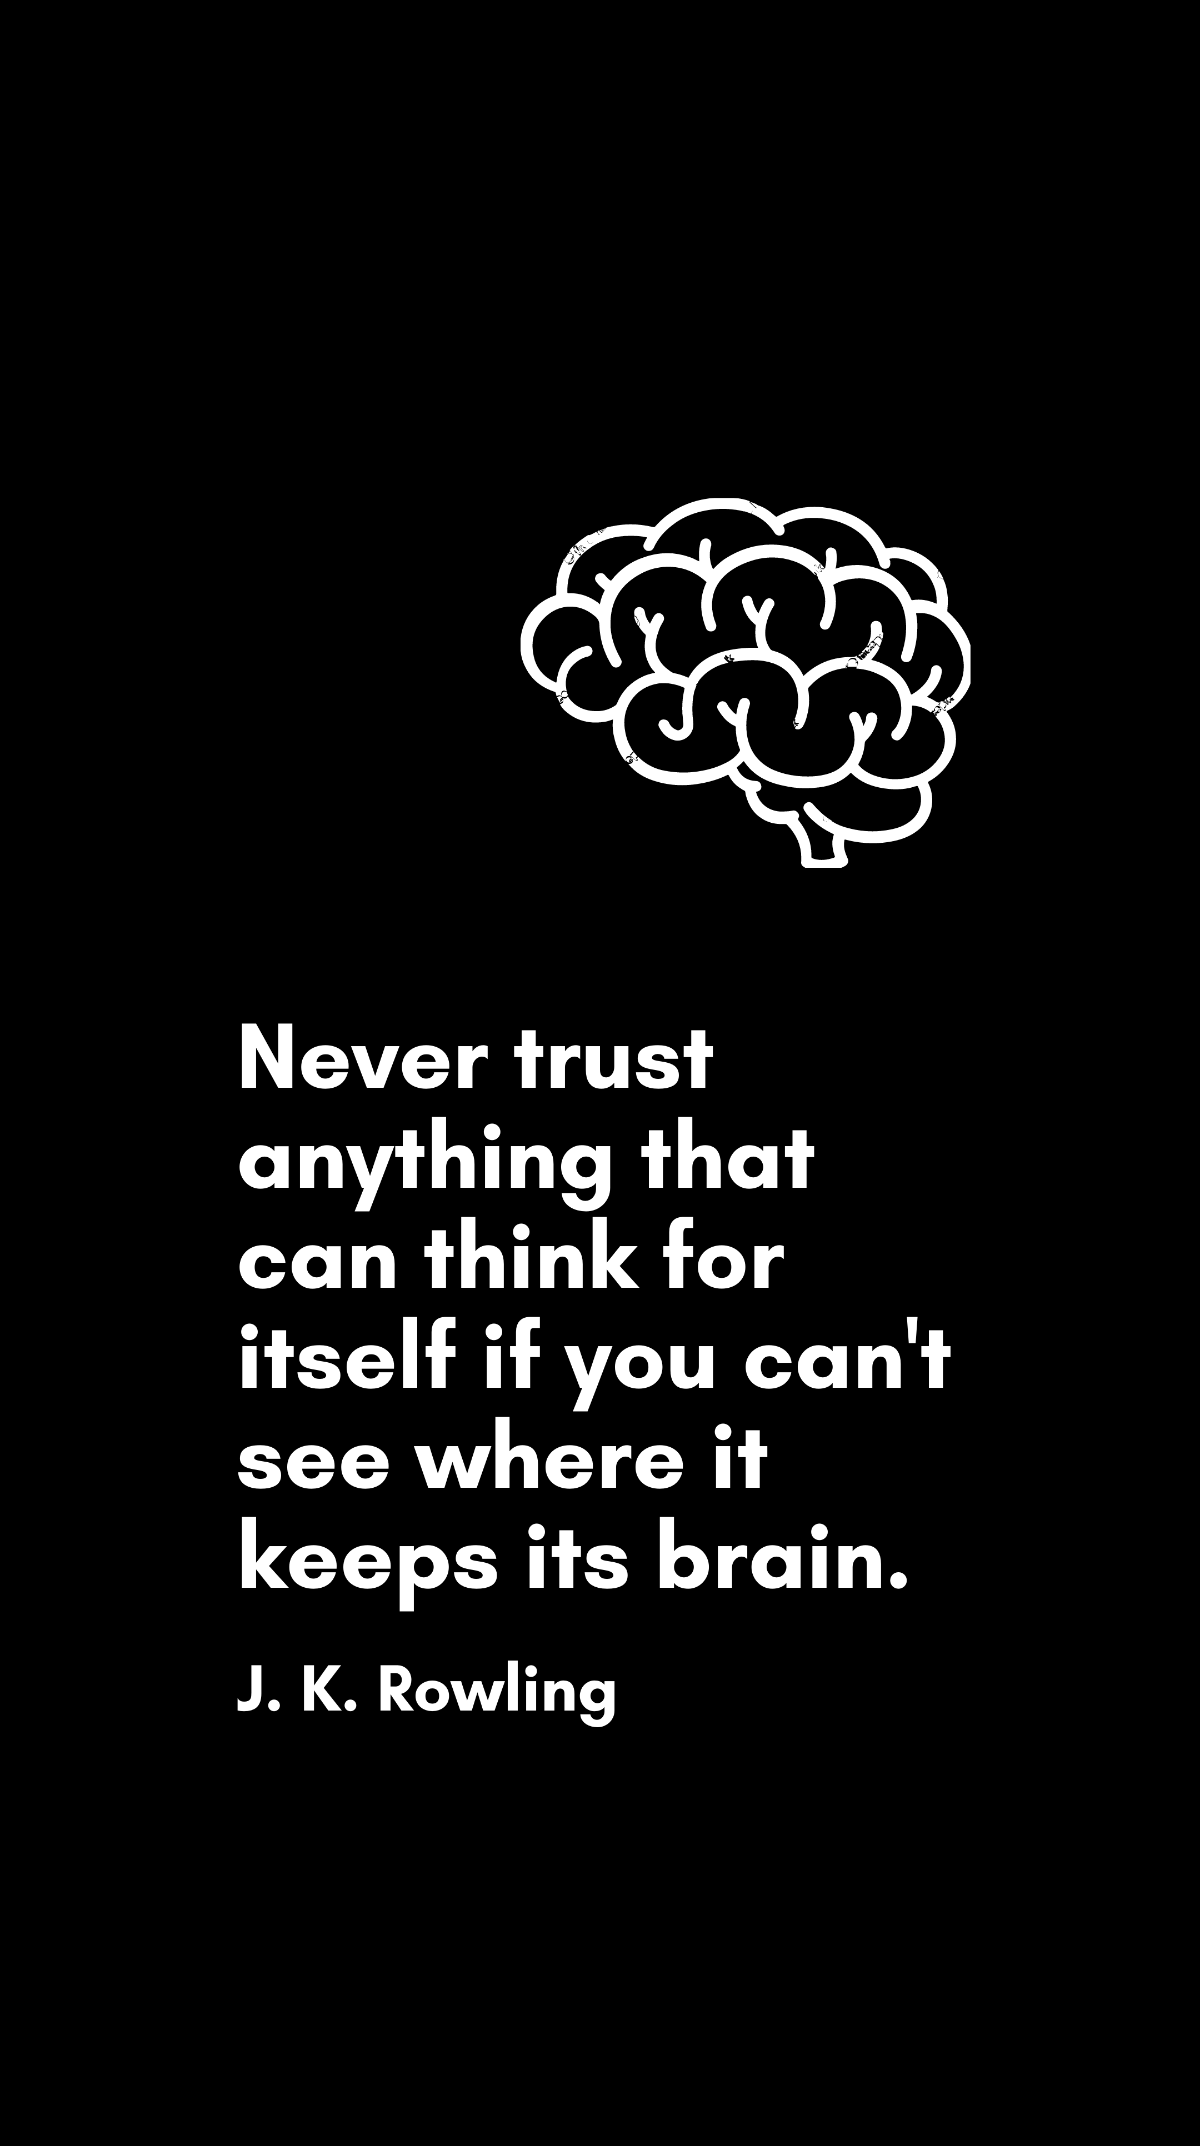 J. K. Rowling - Never trust anything that can think for itself if you can't see where it keeps its brain.